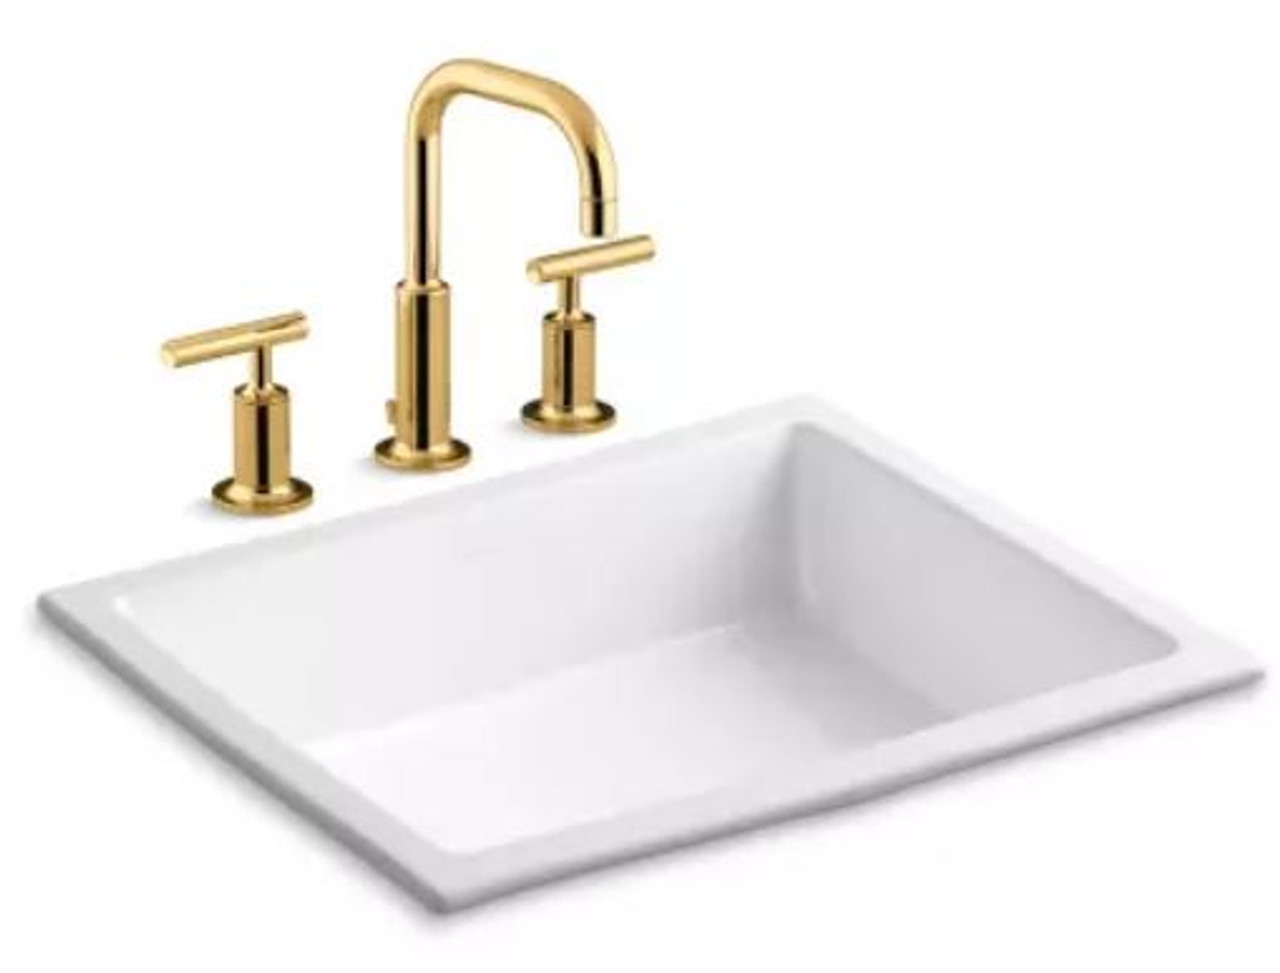 Kohler Verticyl 17 1 4 Undermount Bathroom Sink With Overflow And Devonshire Single Hole Bathroom Faucet With Pop Up Drain Assembly Royal Bath Place